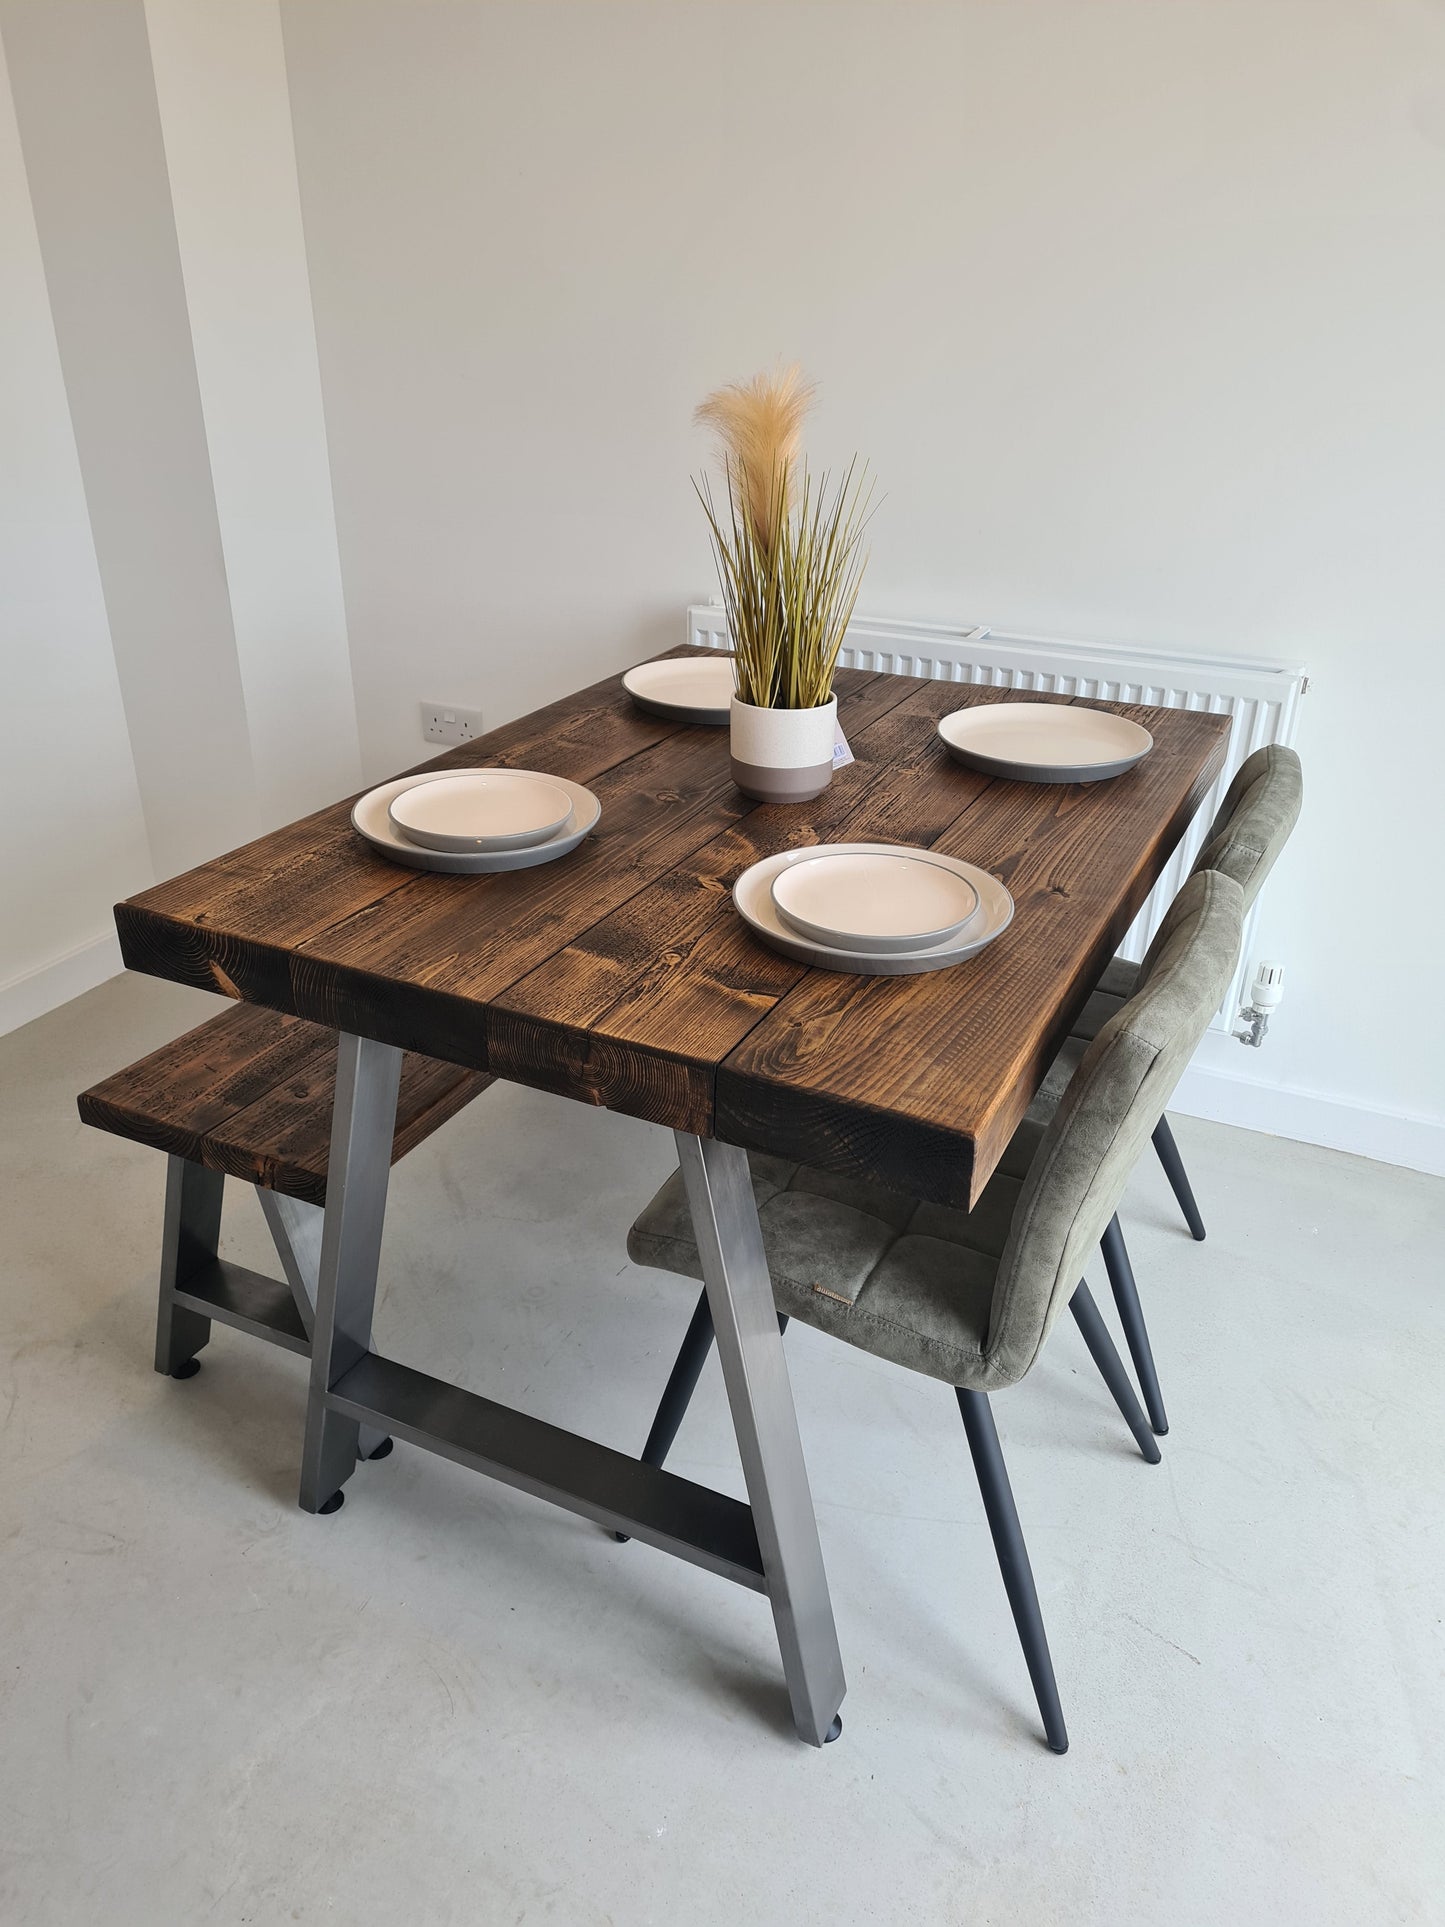 Dining Table with A Frame legs + 2 benches